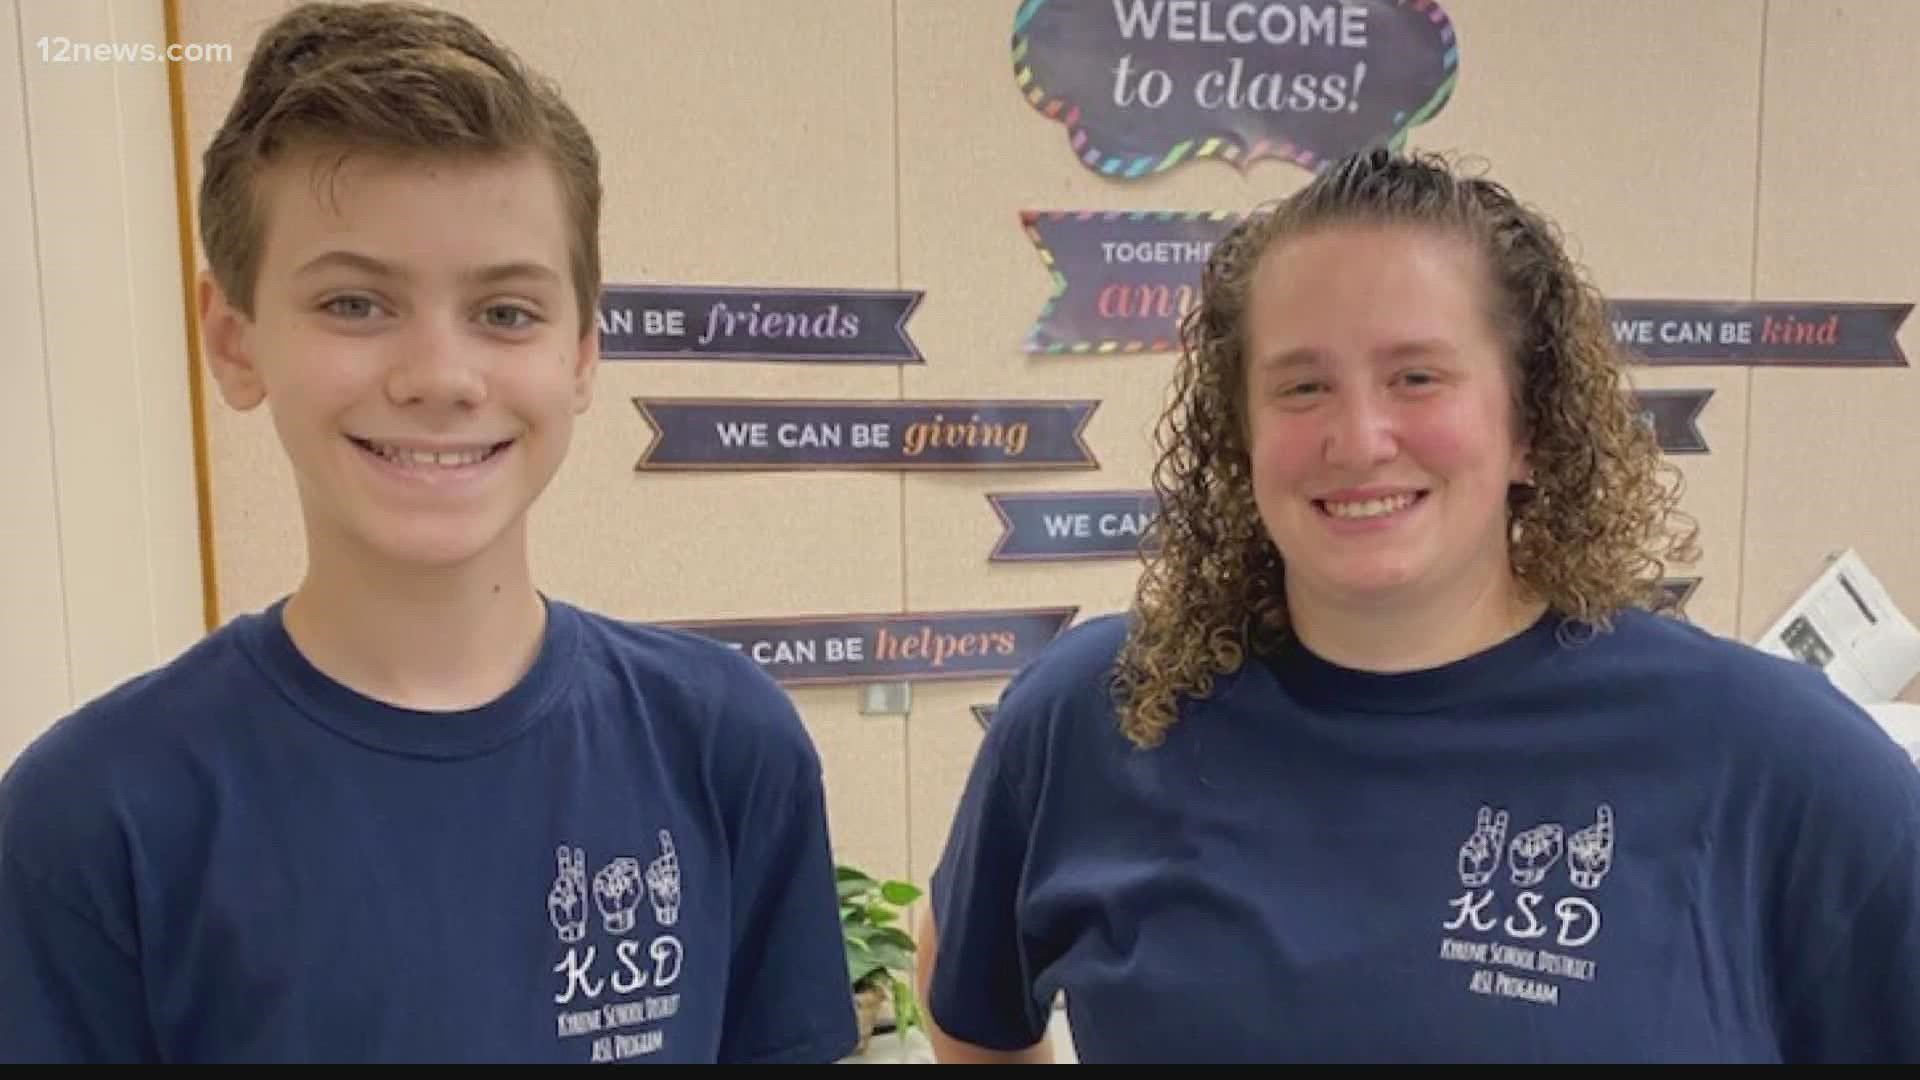 It’s an incredible story out of the East Valley, an 8th-grade student is raising money to replace his teacher’s hearing aid, something her insurance isn’t covering.